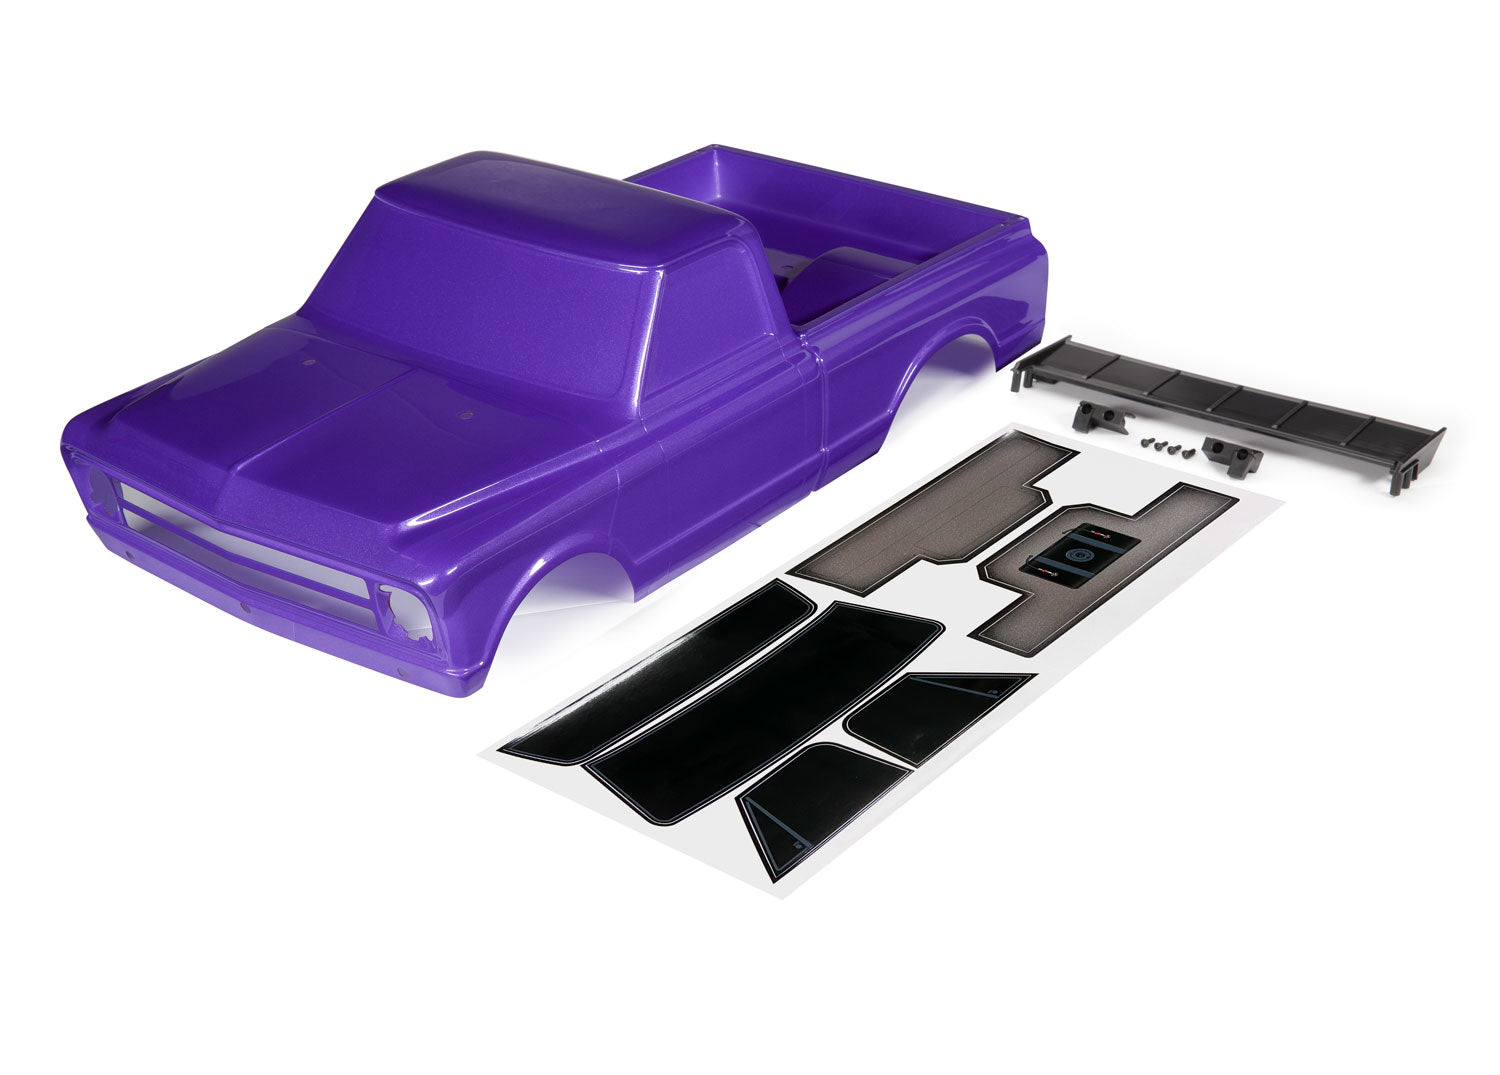 TRAXXAS 9411P Body, Chevrolet C10 (purple) (includes wing & decals) (requires #9415 series body accessories to complete body)